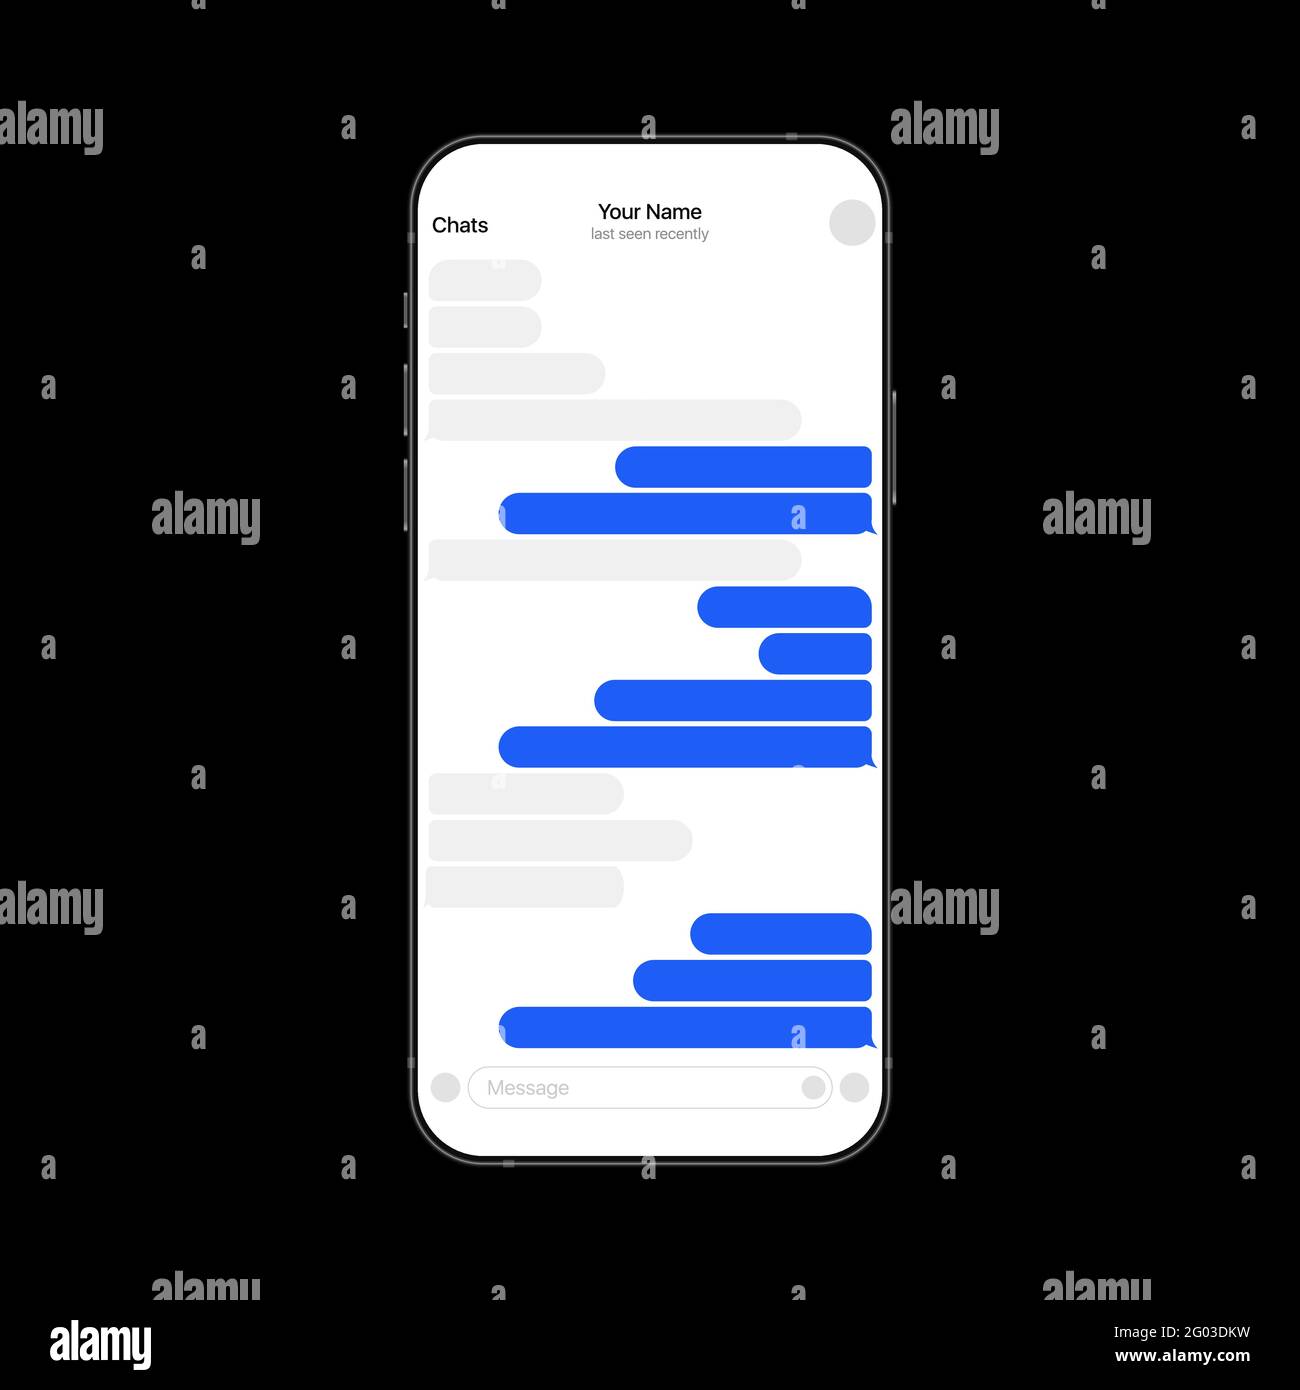 Messenger Interface on Smartphone. Mobile Texting App Realistic UI. Vector illustration Stock Vector